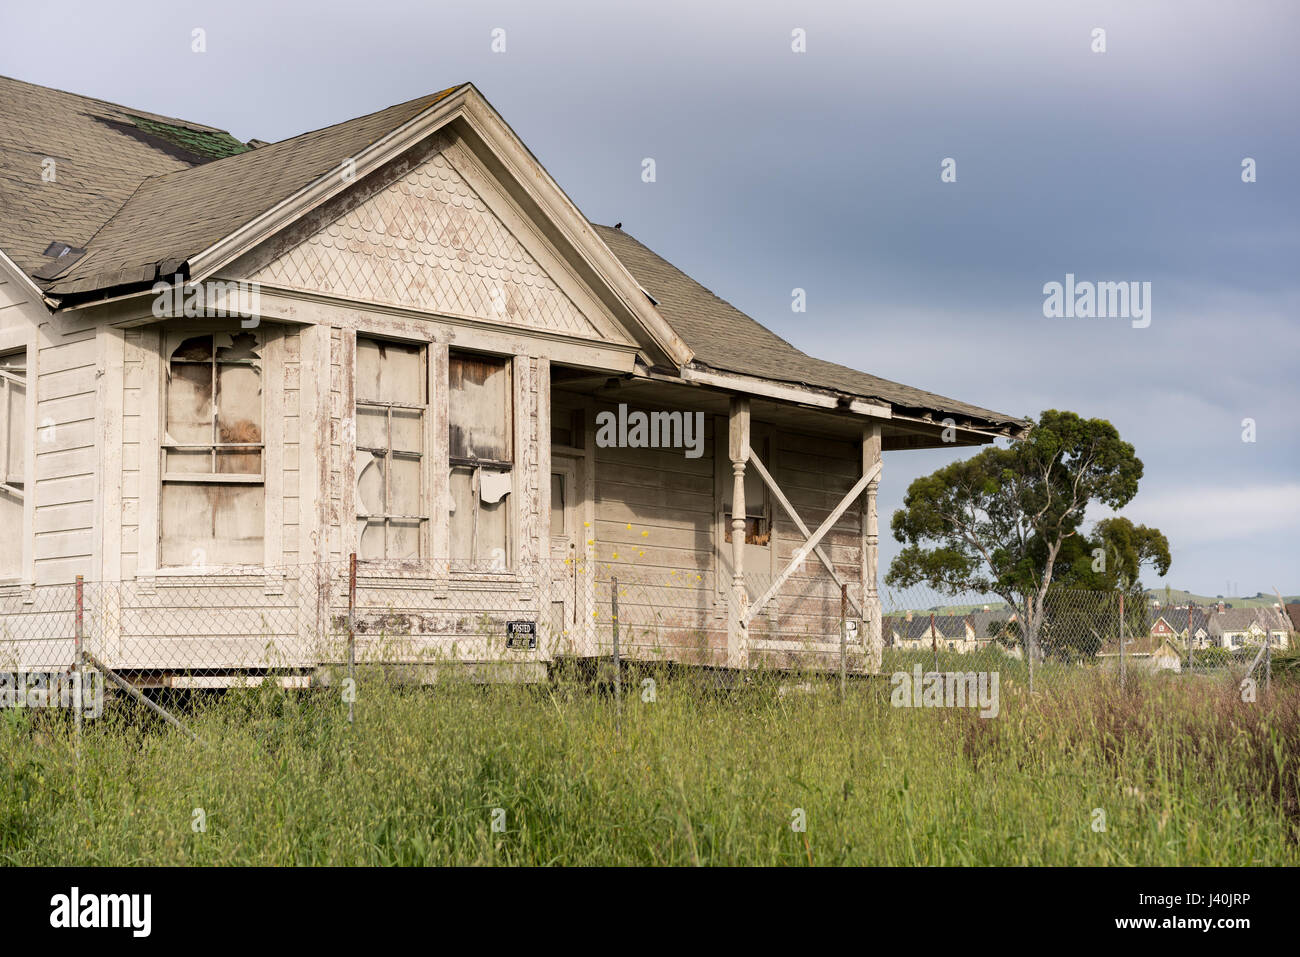 Abandoned single family home with wooden siding as fixer upper property Stock Photo